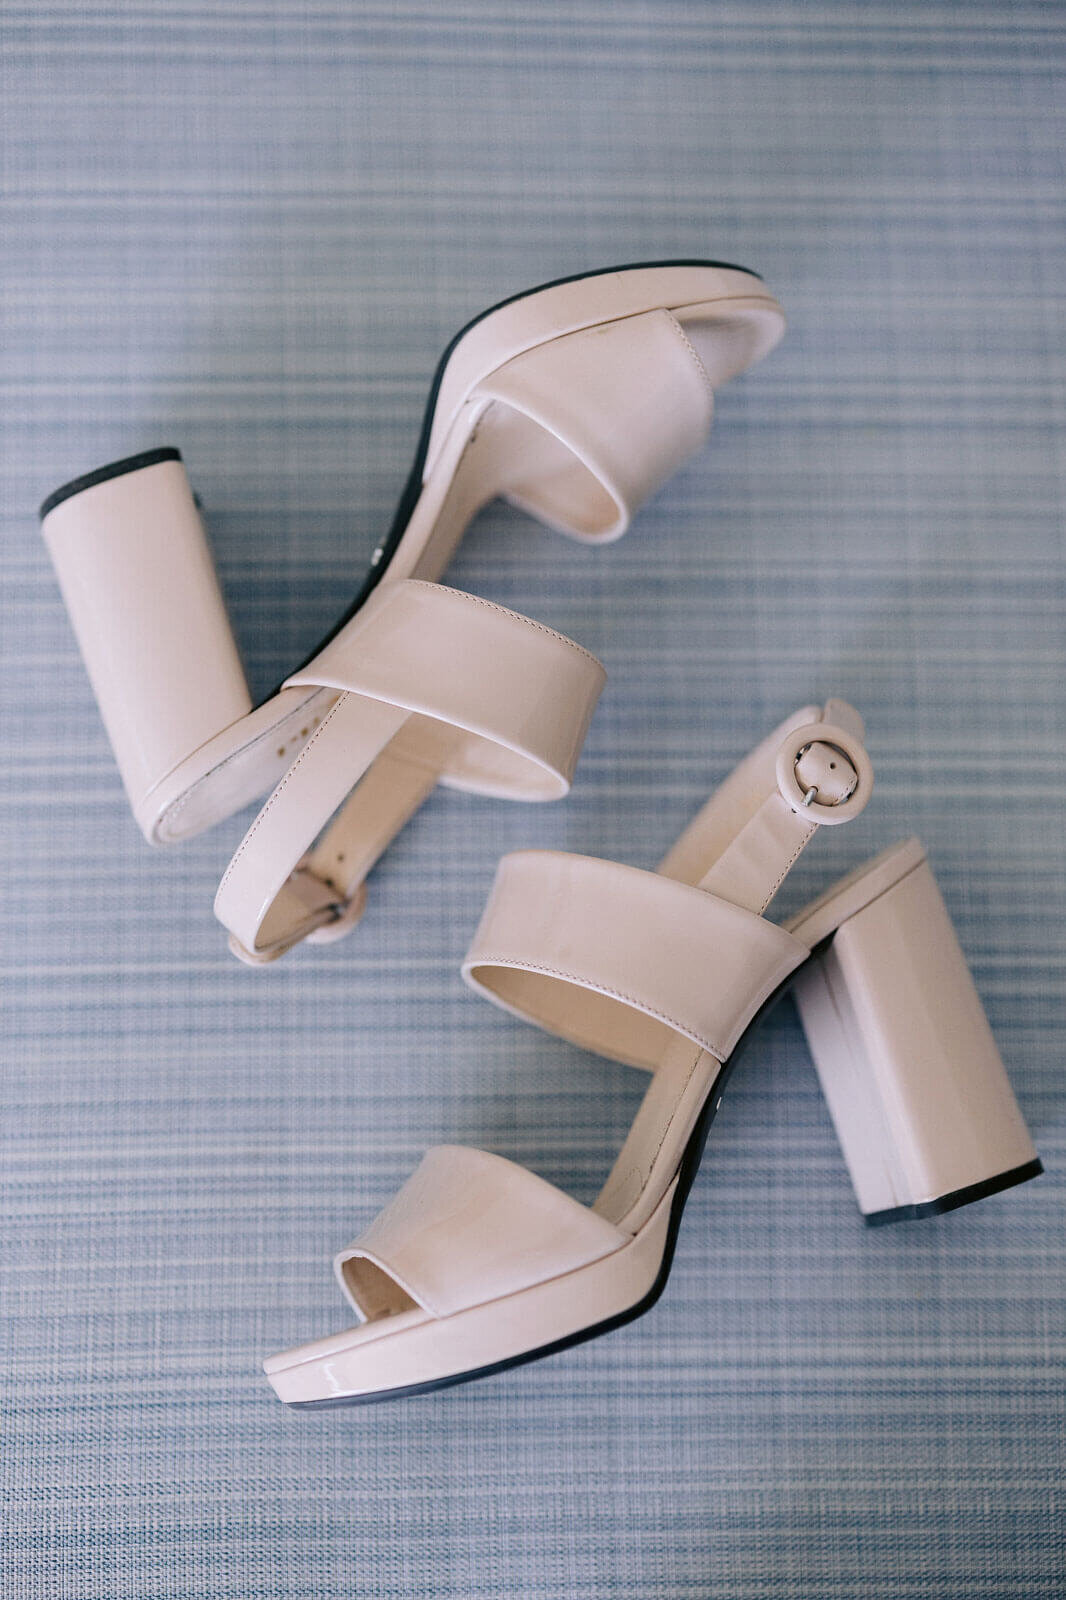 Close-up shot of the bride's wedding shoes in Cape Cod, MA.